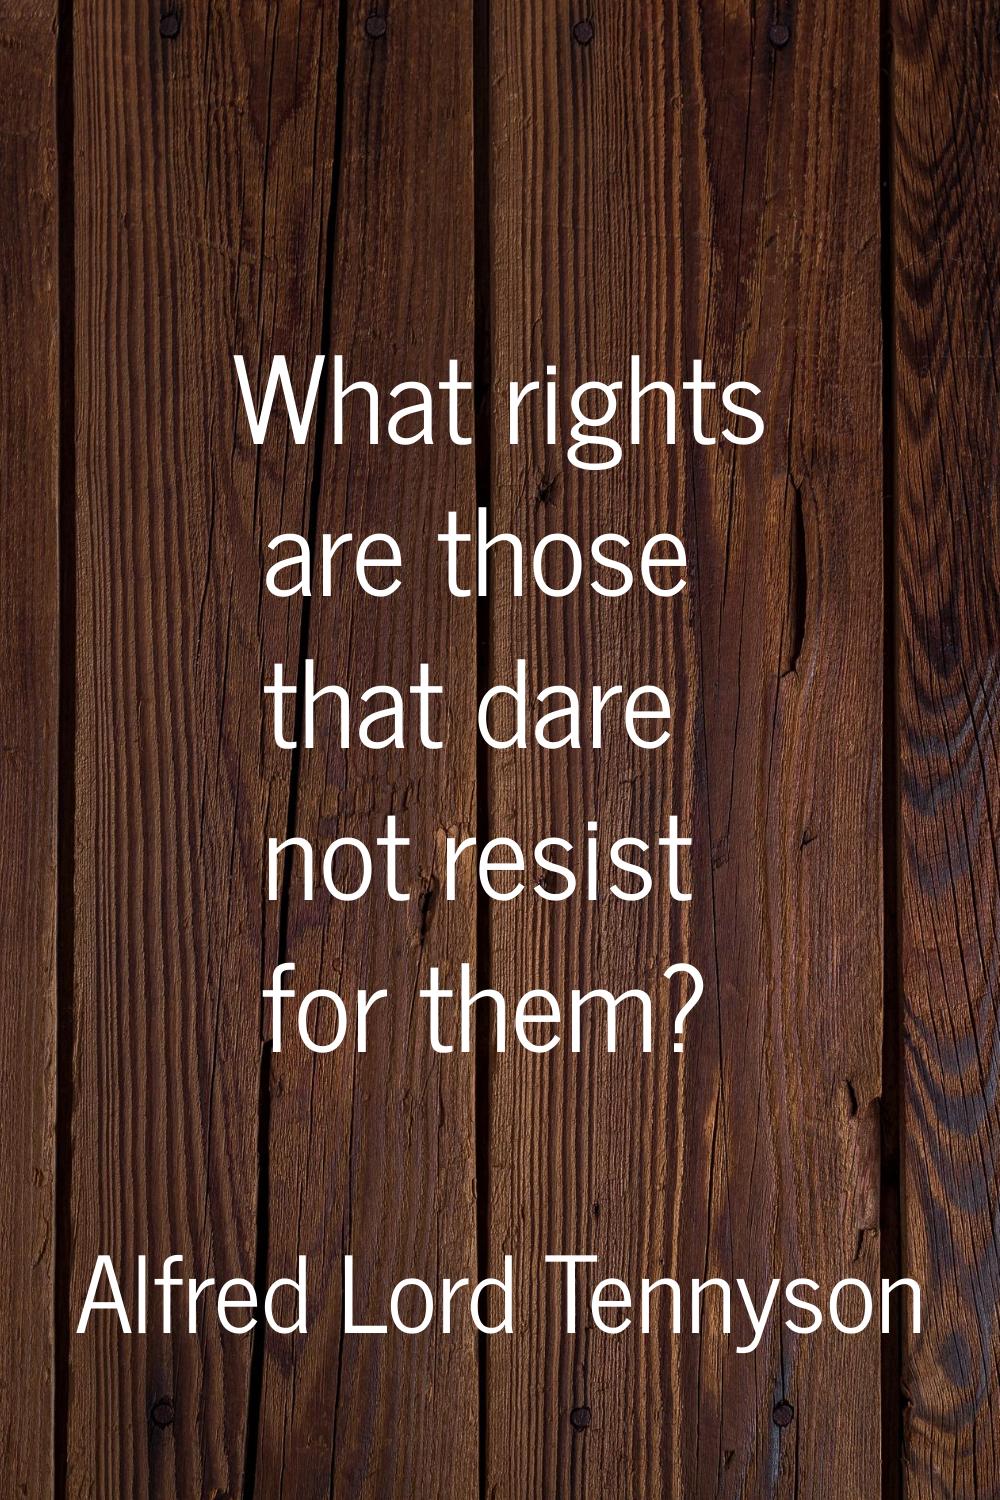 What rights are those that dare not resist for them?